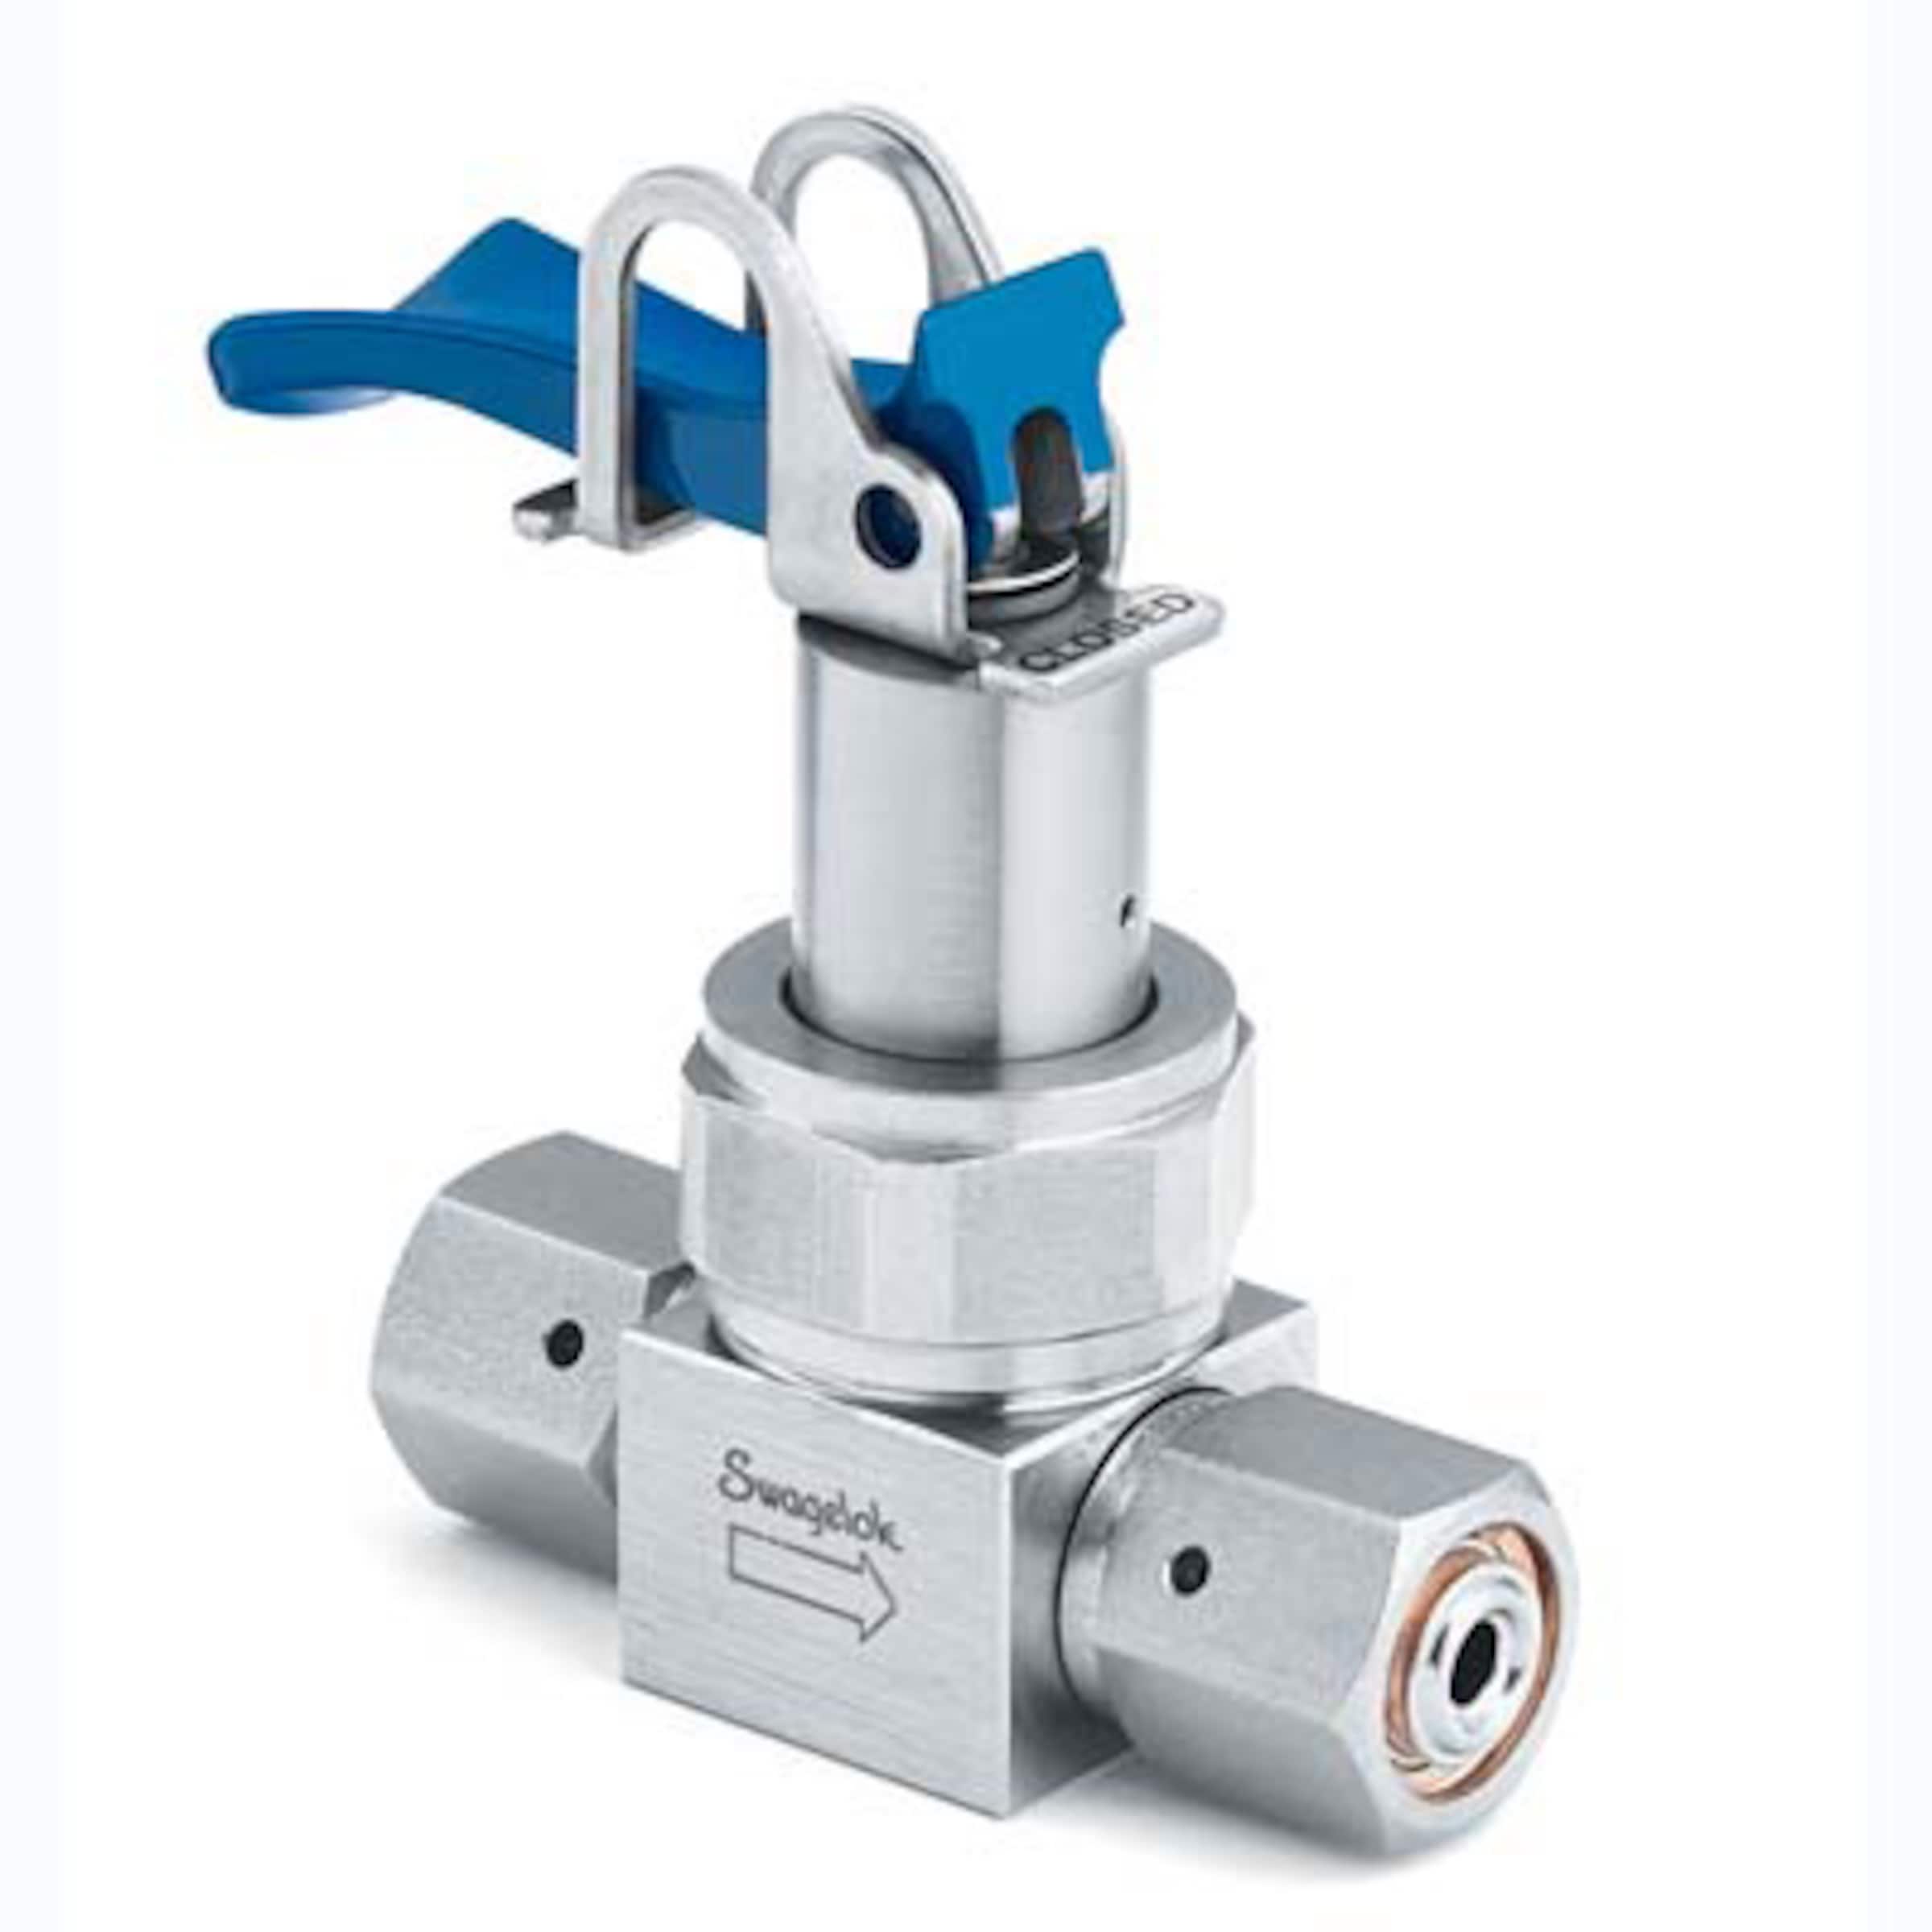 316L VIM-VAR UHP Diaphragm Sealed Valve, 1/4 in. Female VCR Fitting, SC-01  Cleaned, Blue Toggle Handle, Ultrahigh-Purity Shutoff Diaphragm Valves, DP  Series, Diaphragm-Sealed Valves, Valves, All Products